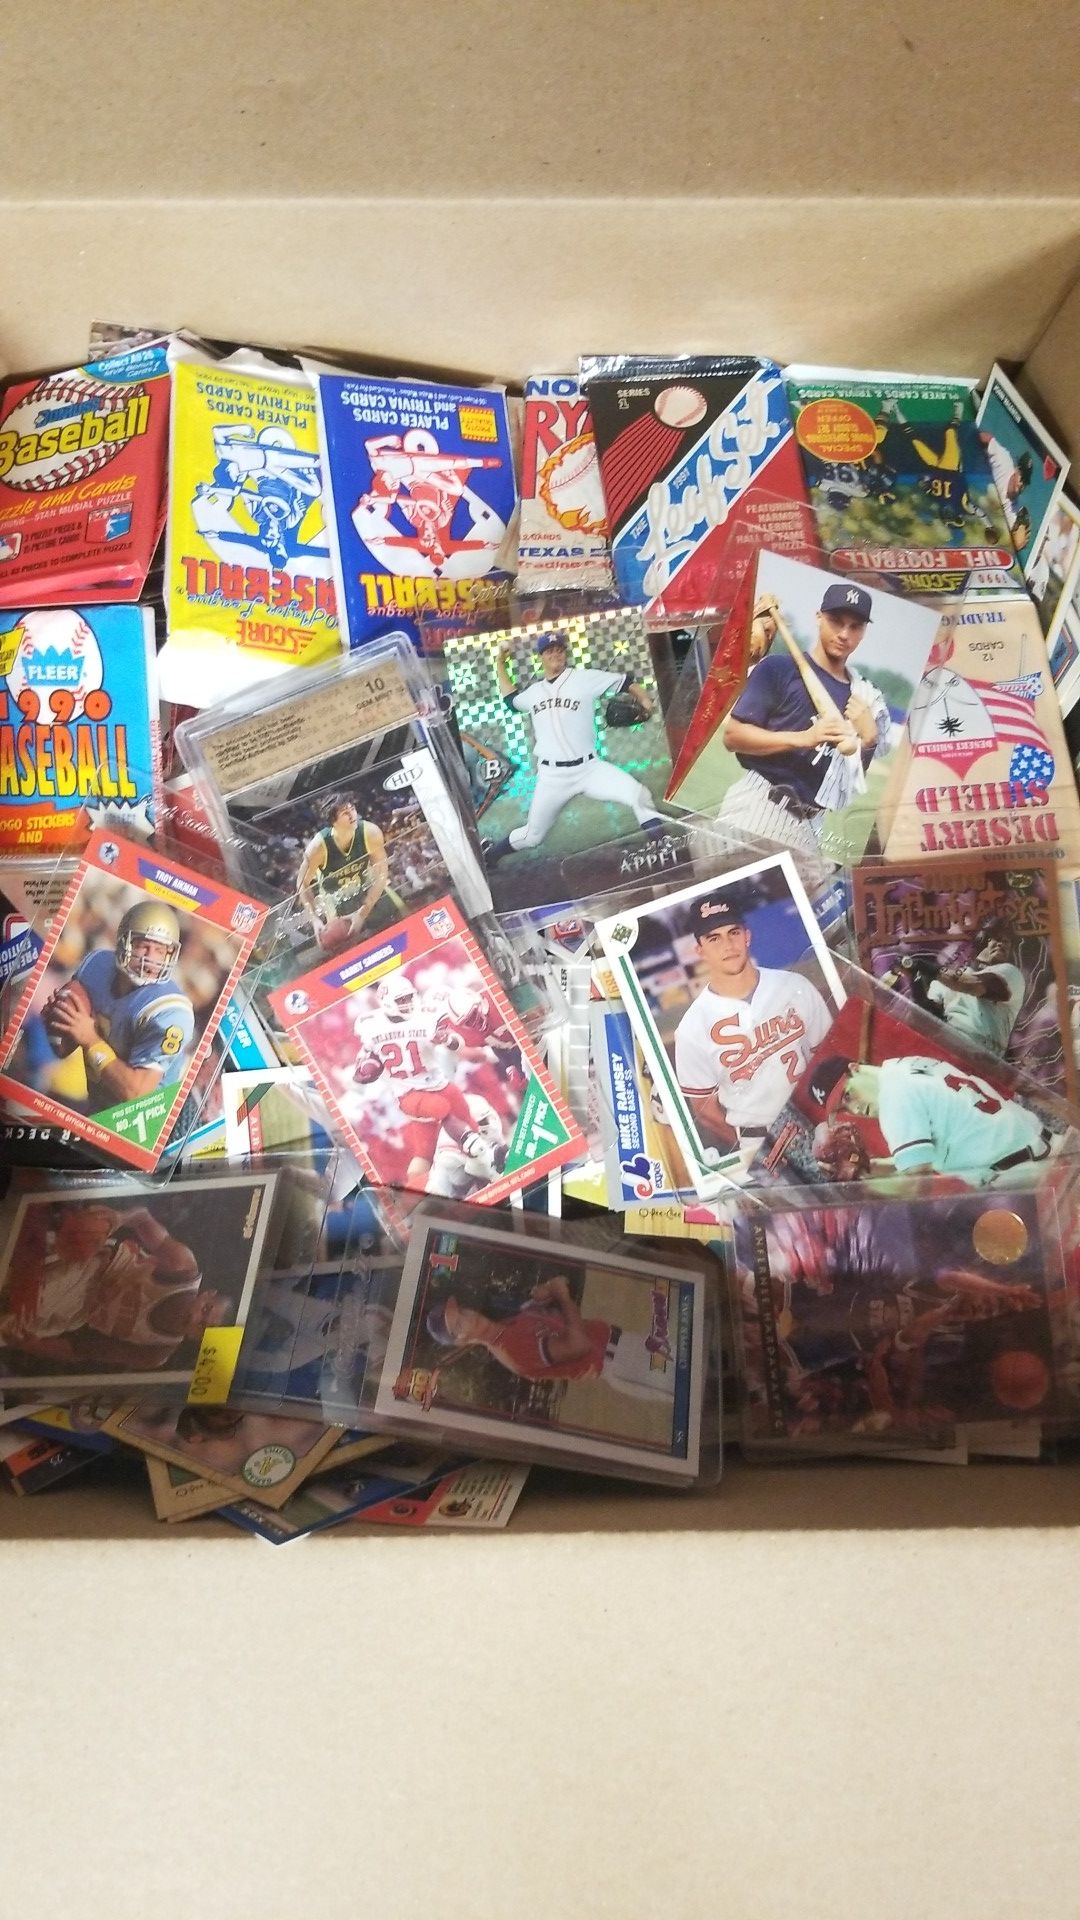 Sports cards- huge basketball cards , football cards , baseball cards around 20lbs, packs unopened. Lot #004 g